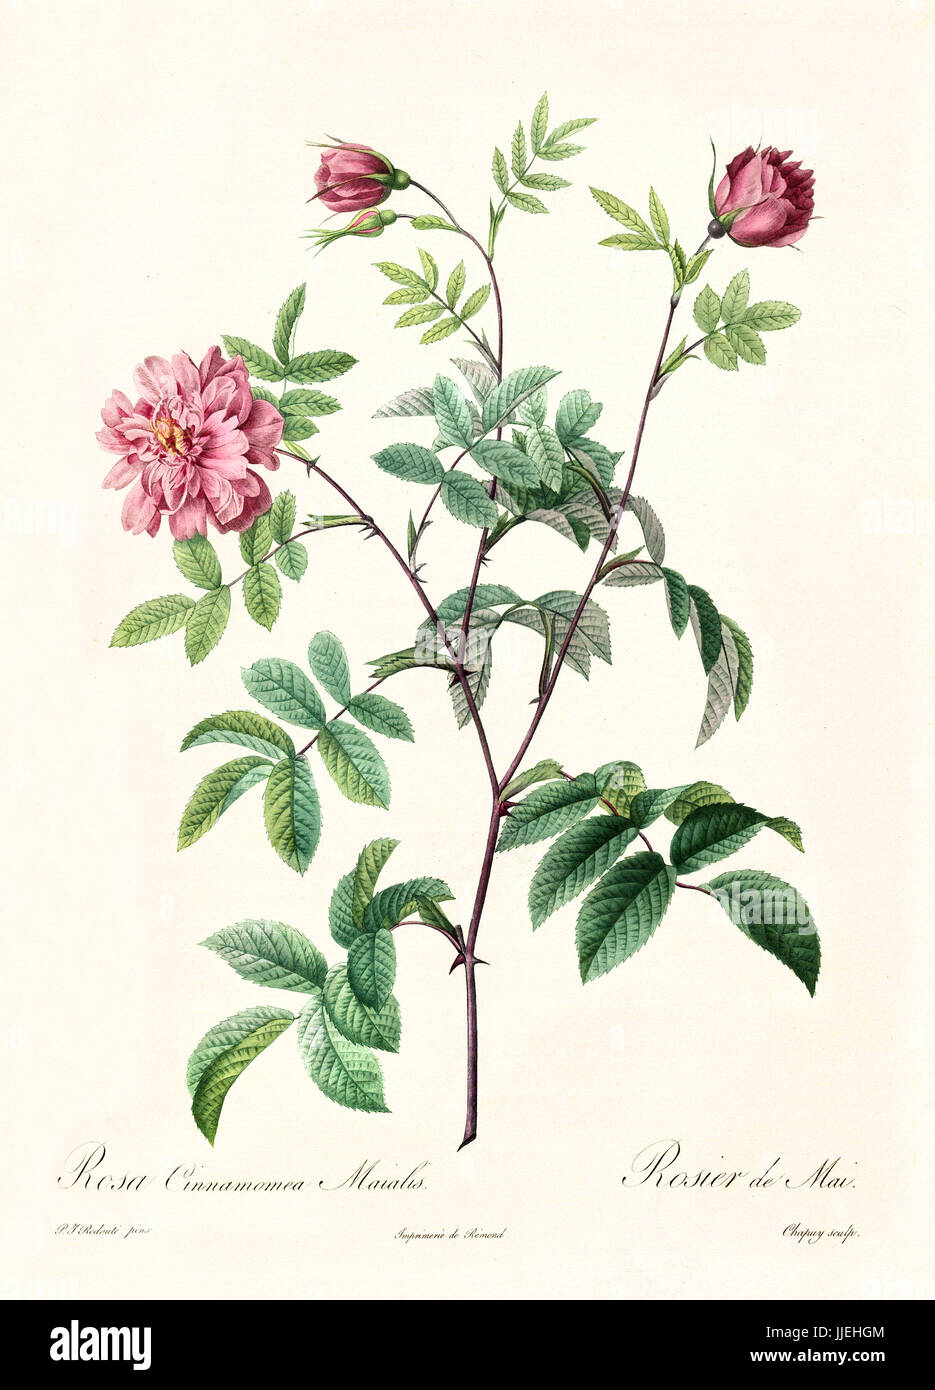 Old illustration of Rosa cimmamomea majalis. Created by P. R. Redoute, published on Les Roses, Imp. Firmin Didot, Paris, 1817-24 Stock Photo